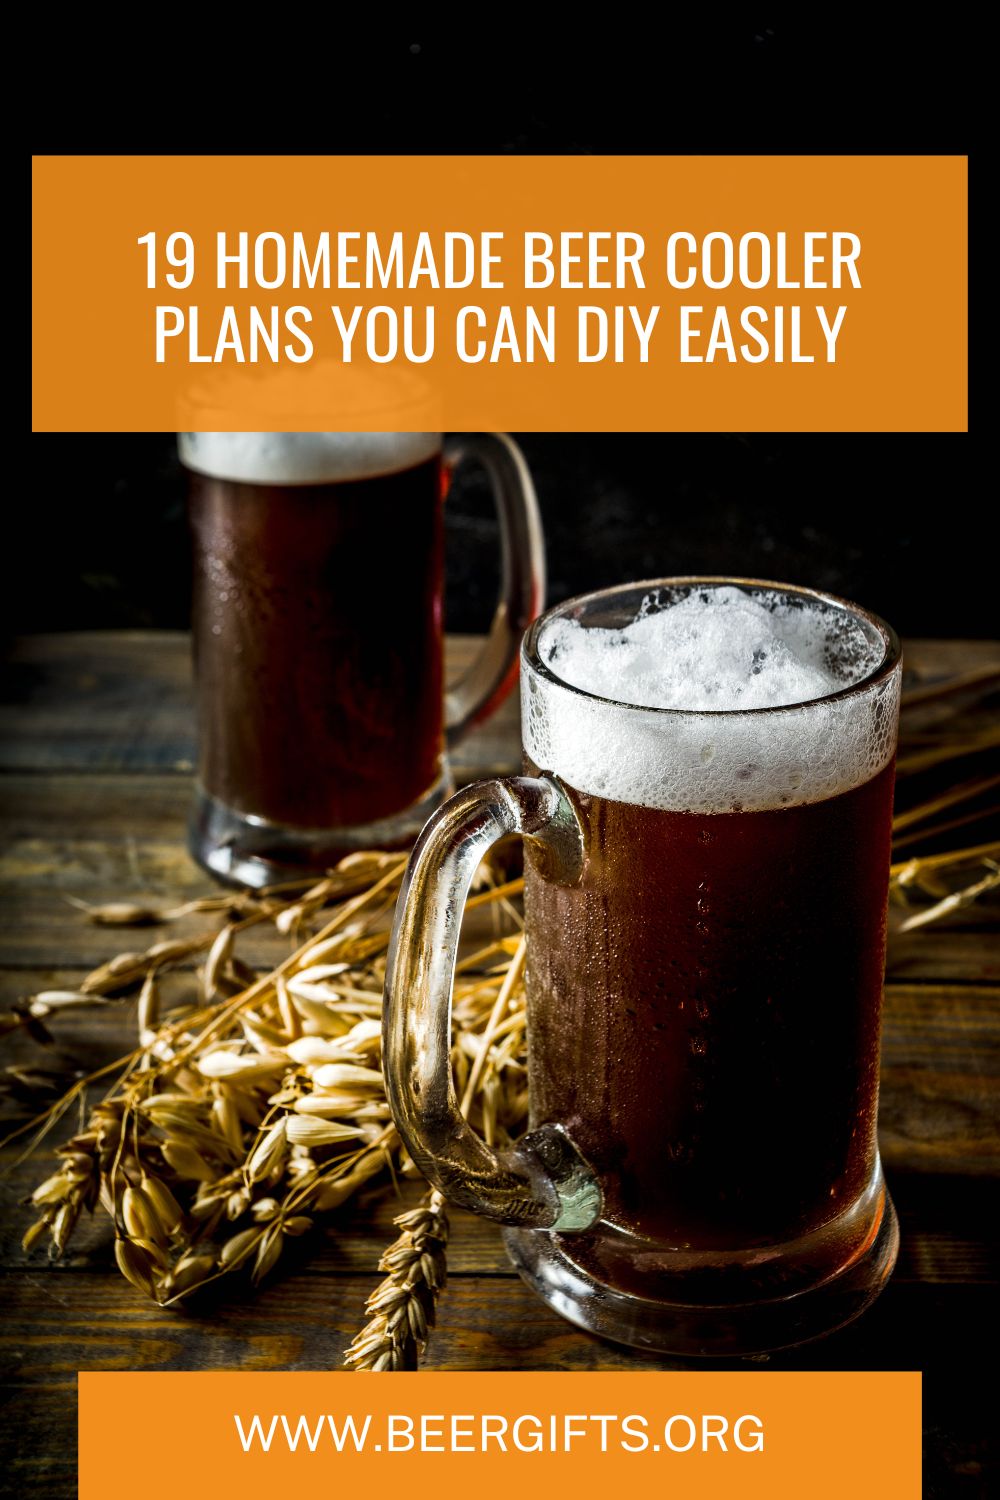 19 Homemade Beer Cooler Plans You Can DIY Easily9